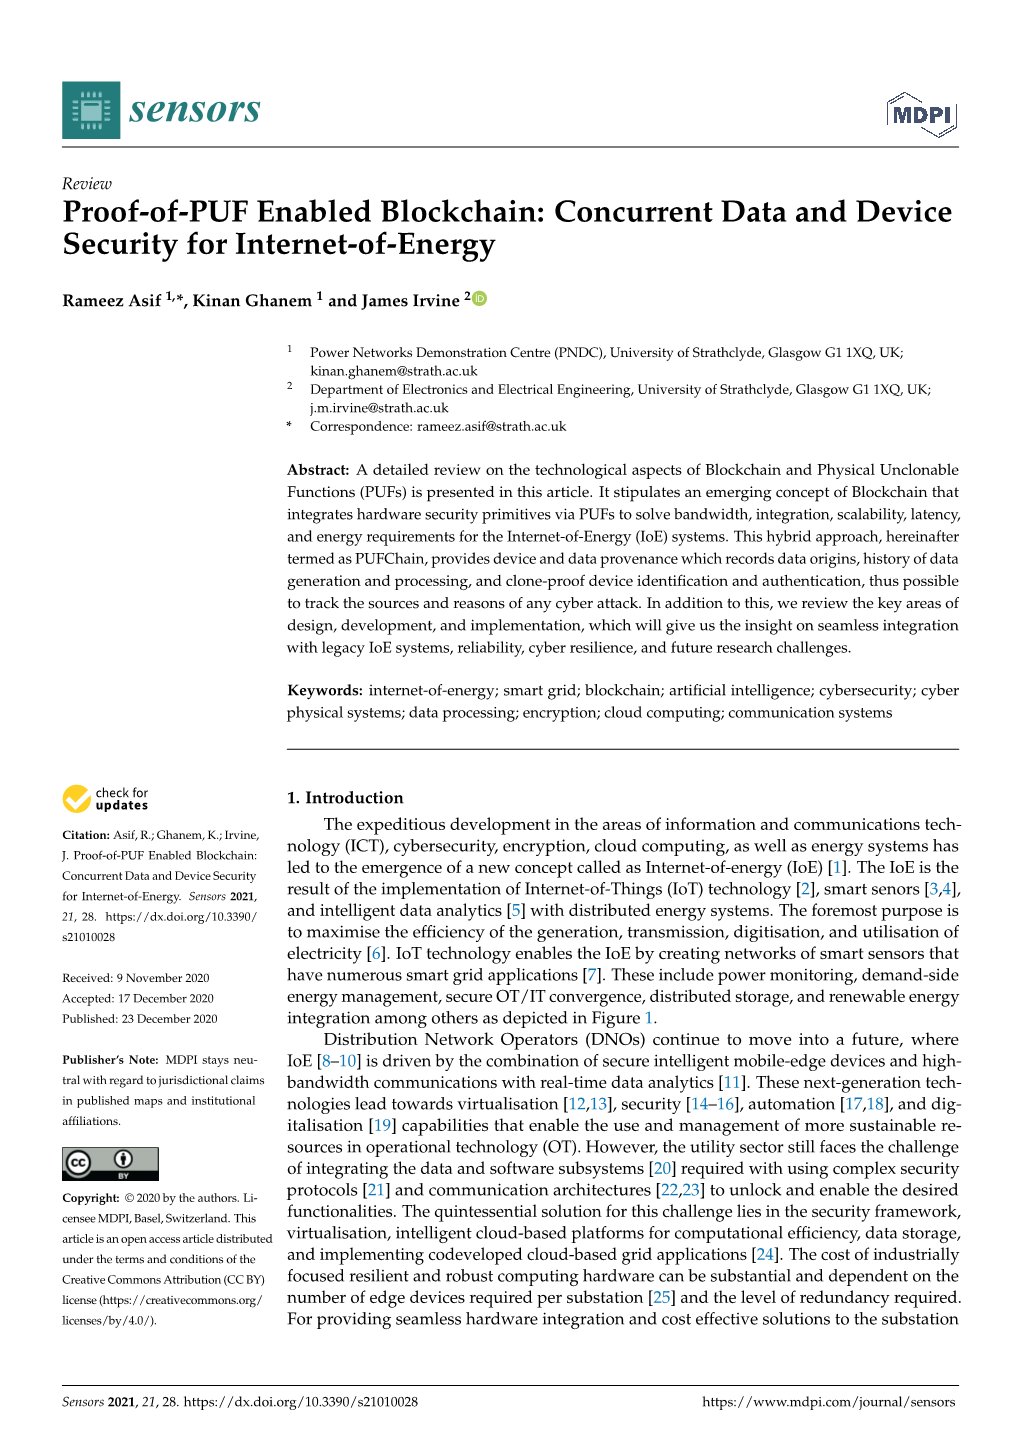 Proof-Of-PUF Enabled Blockchain: Concurrent Data and Device Security for Internet-Of-Energy